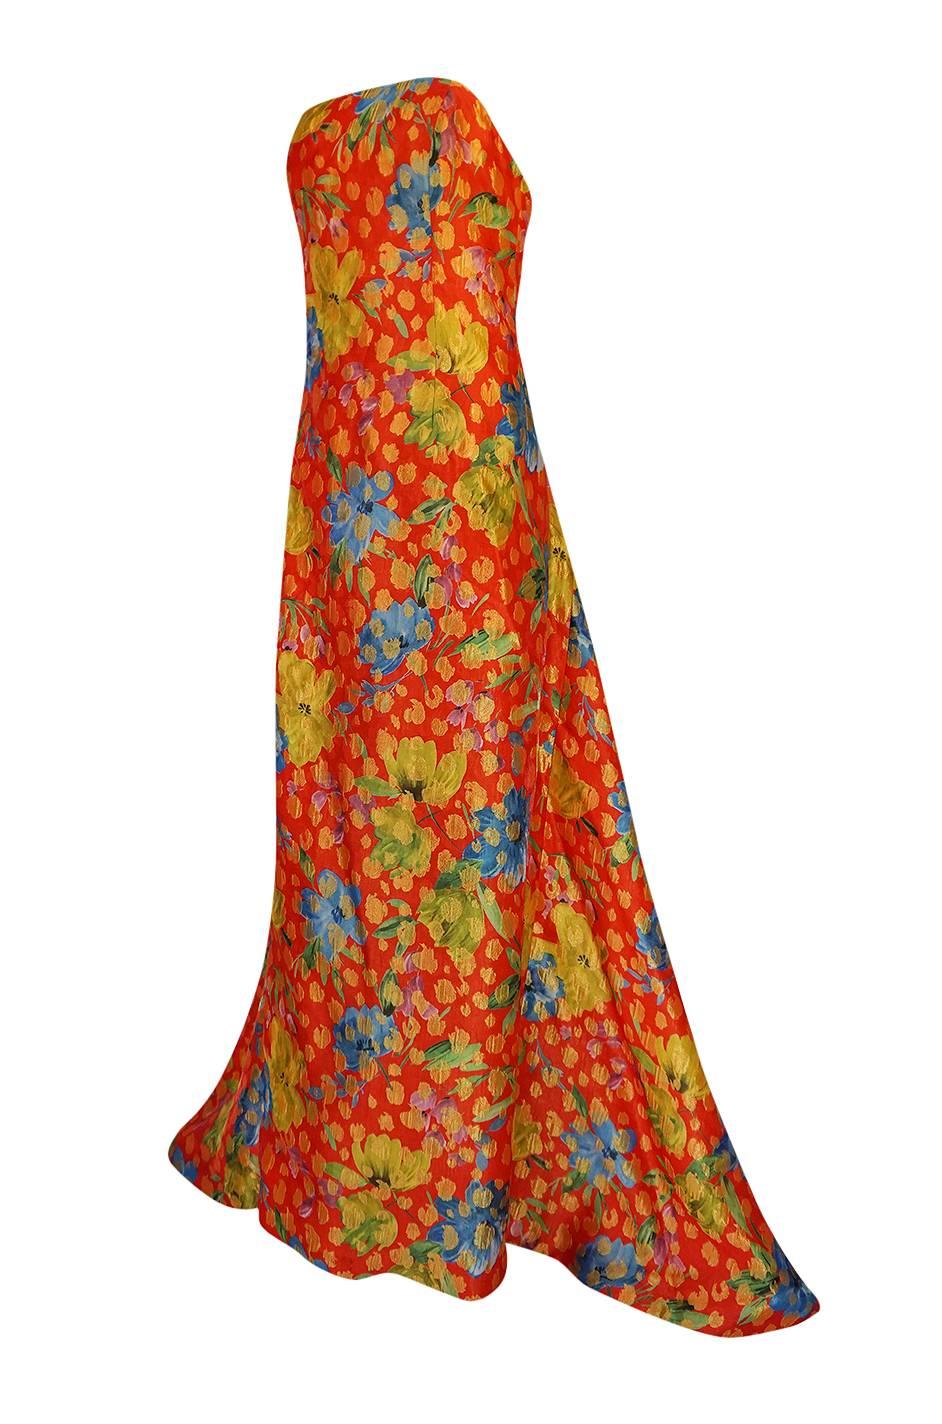 Brown Sully Bonnelly Red and Gold Floral Strapless Trained Dress, circa 1998